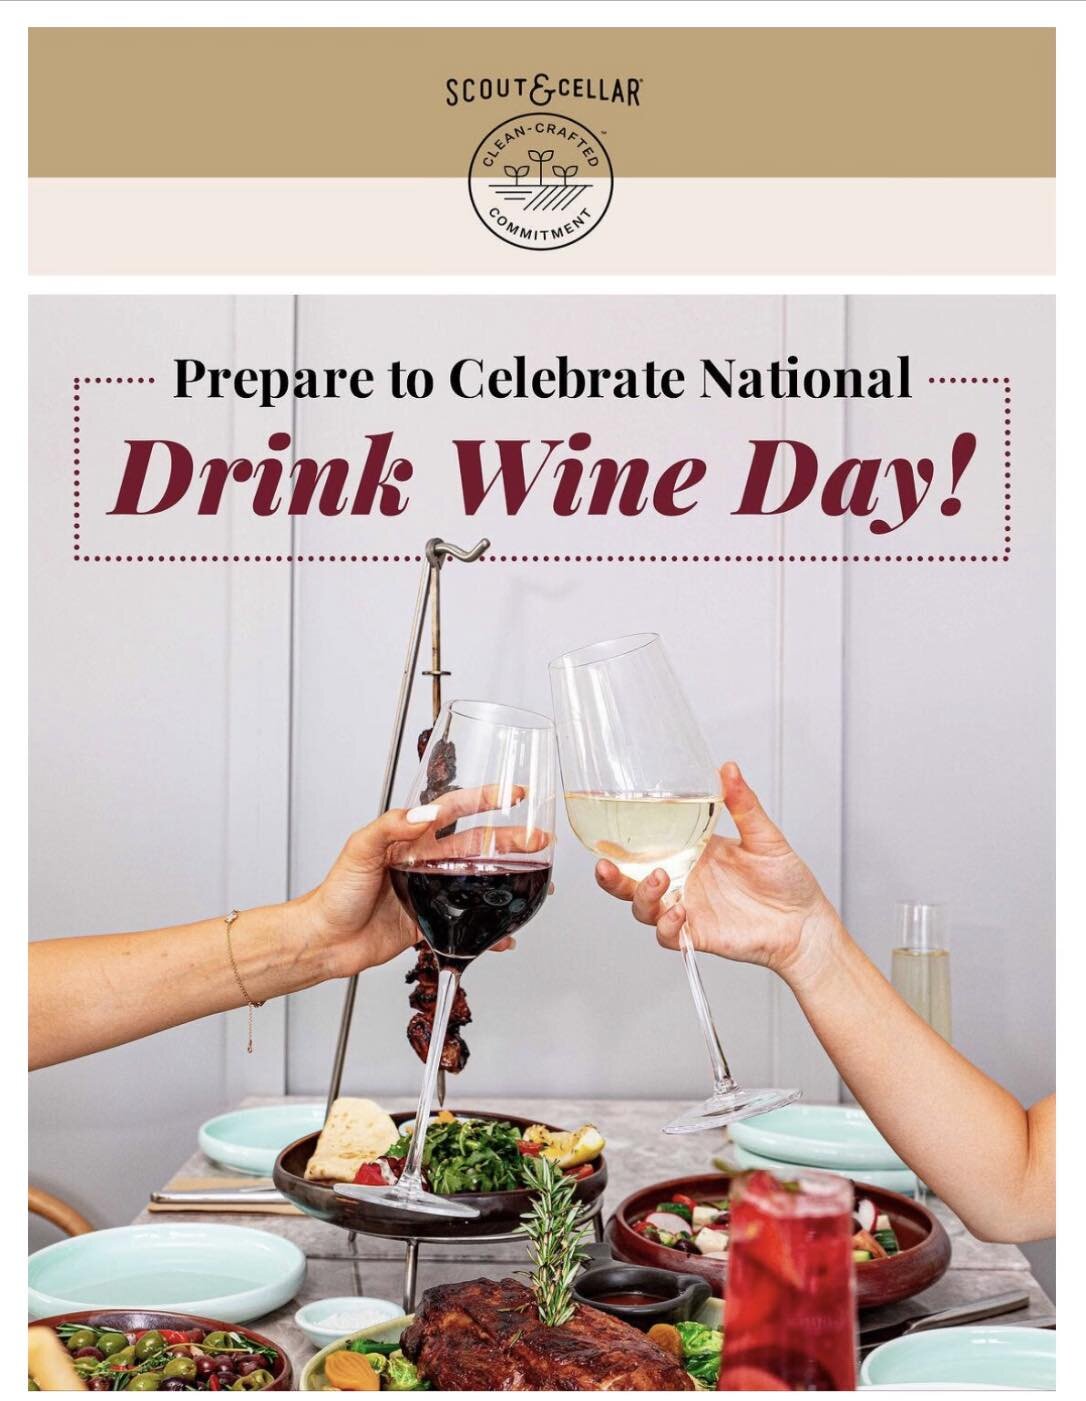 In case you did not know 2/18 is National Drink Wine day. For those inclined to stock up:
SCOUT &amp; CELLAR: Nat'l Drink Wine Day Flash Event! 15% off 6+ bottles. Use code DRINKWINEDAY
https://scoutandcellar.com/cclinton